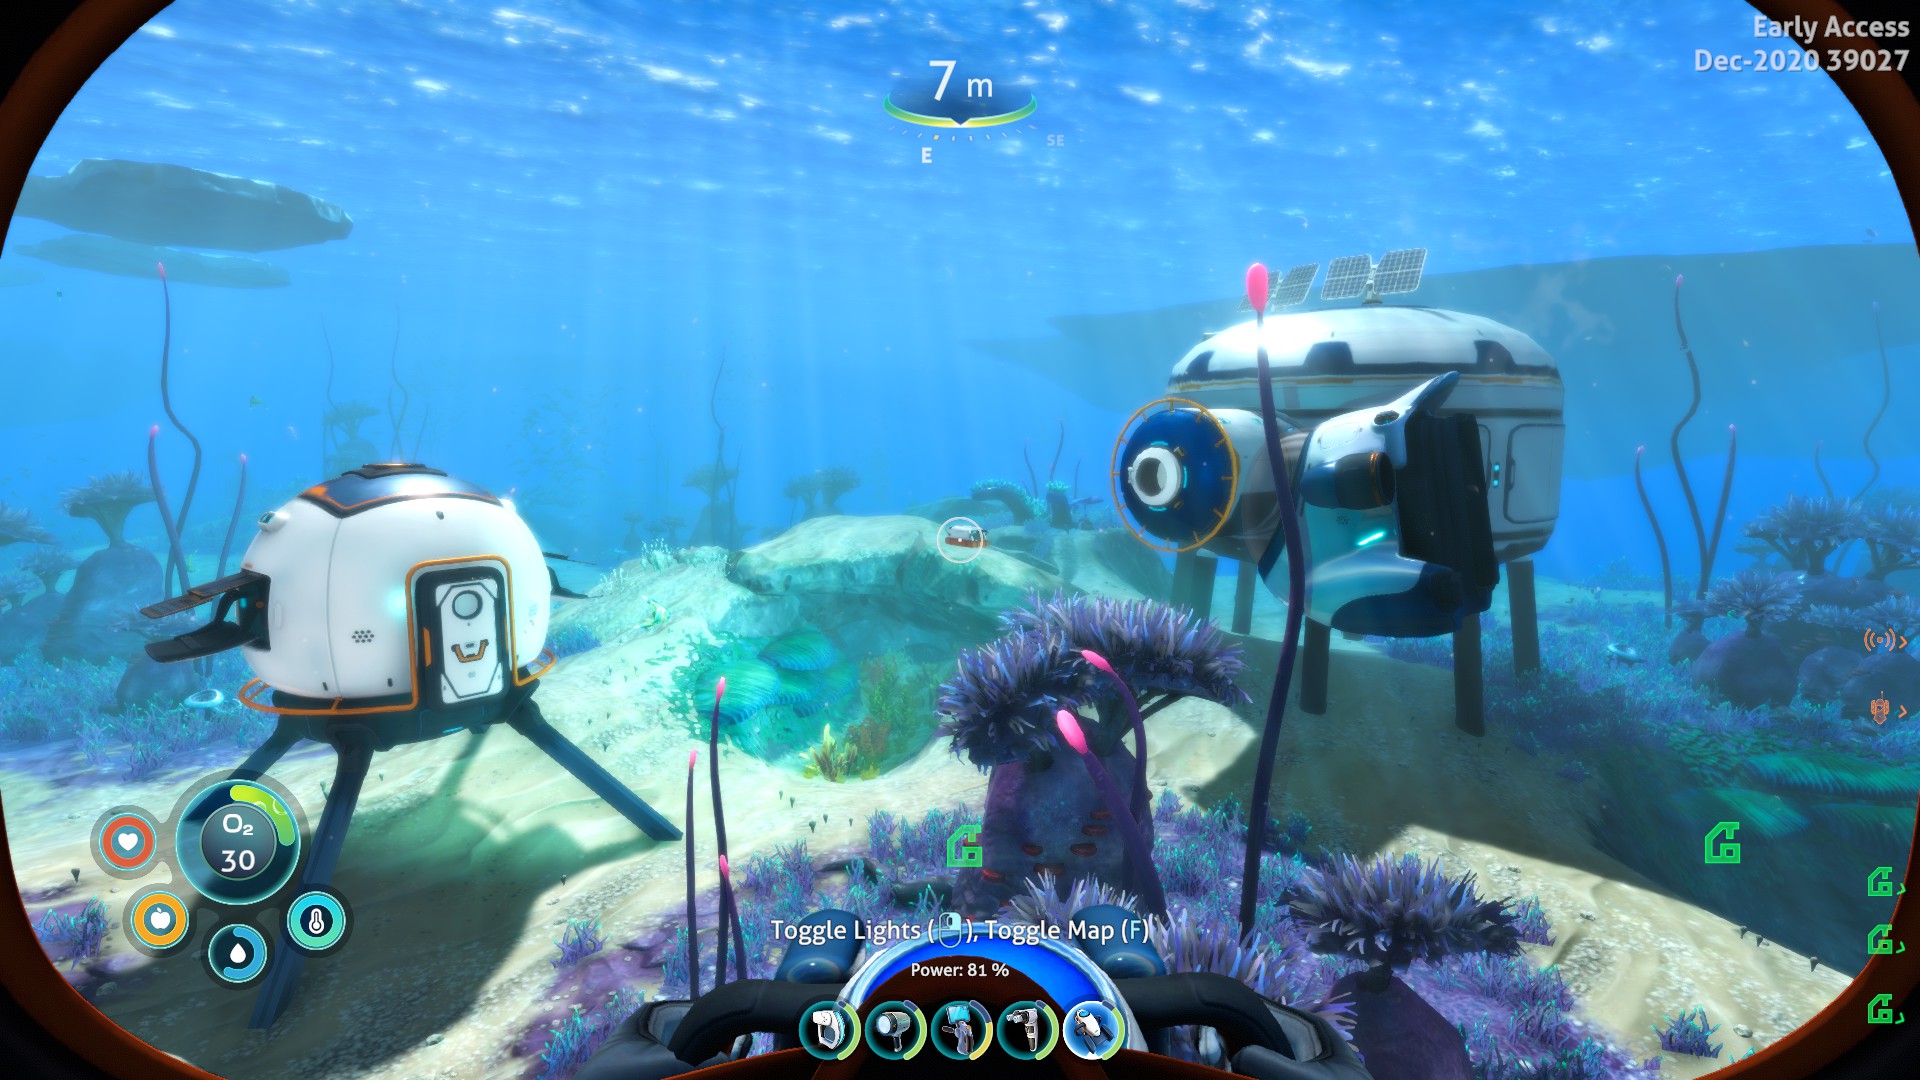 subnautica early access start date